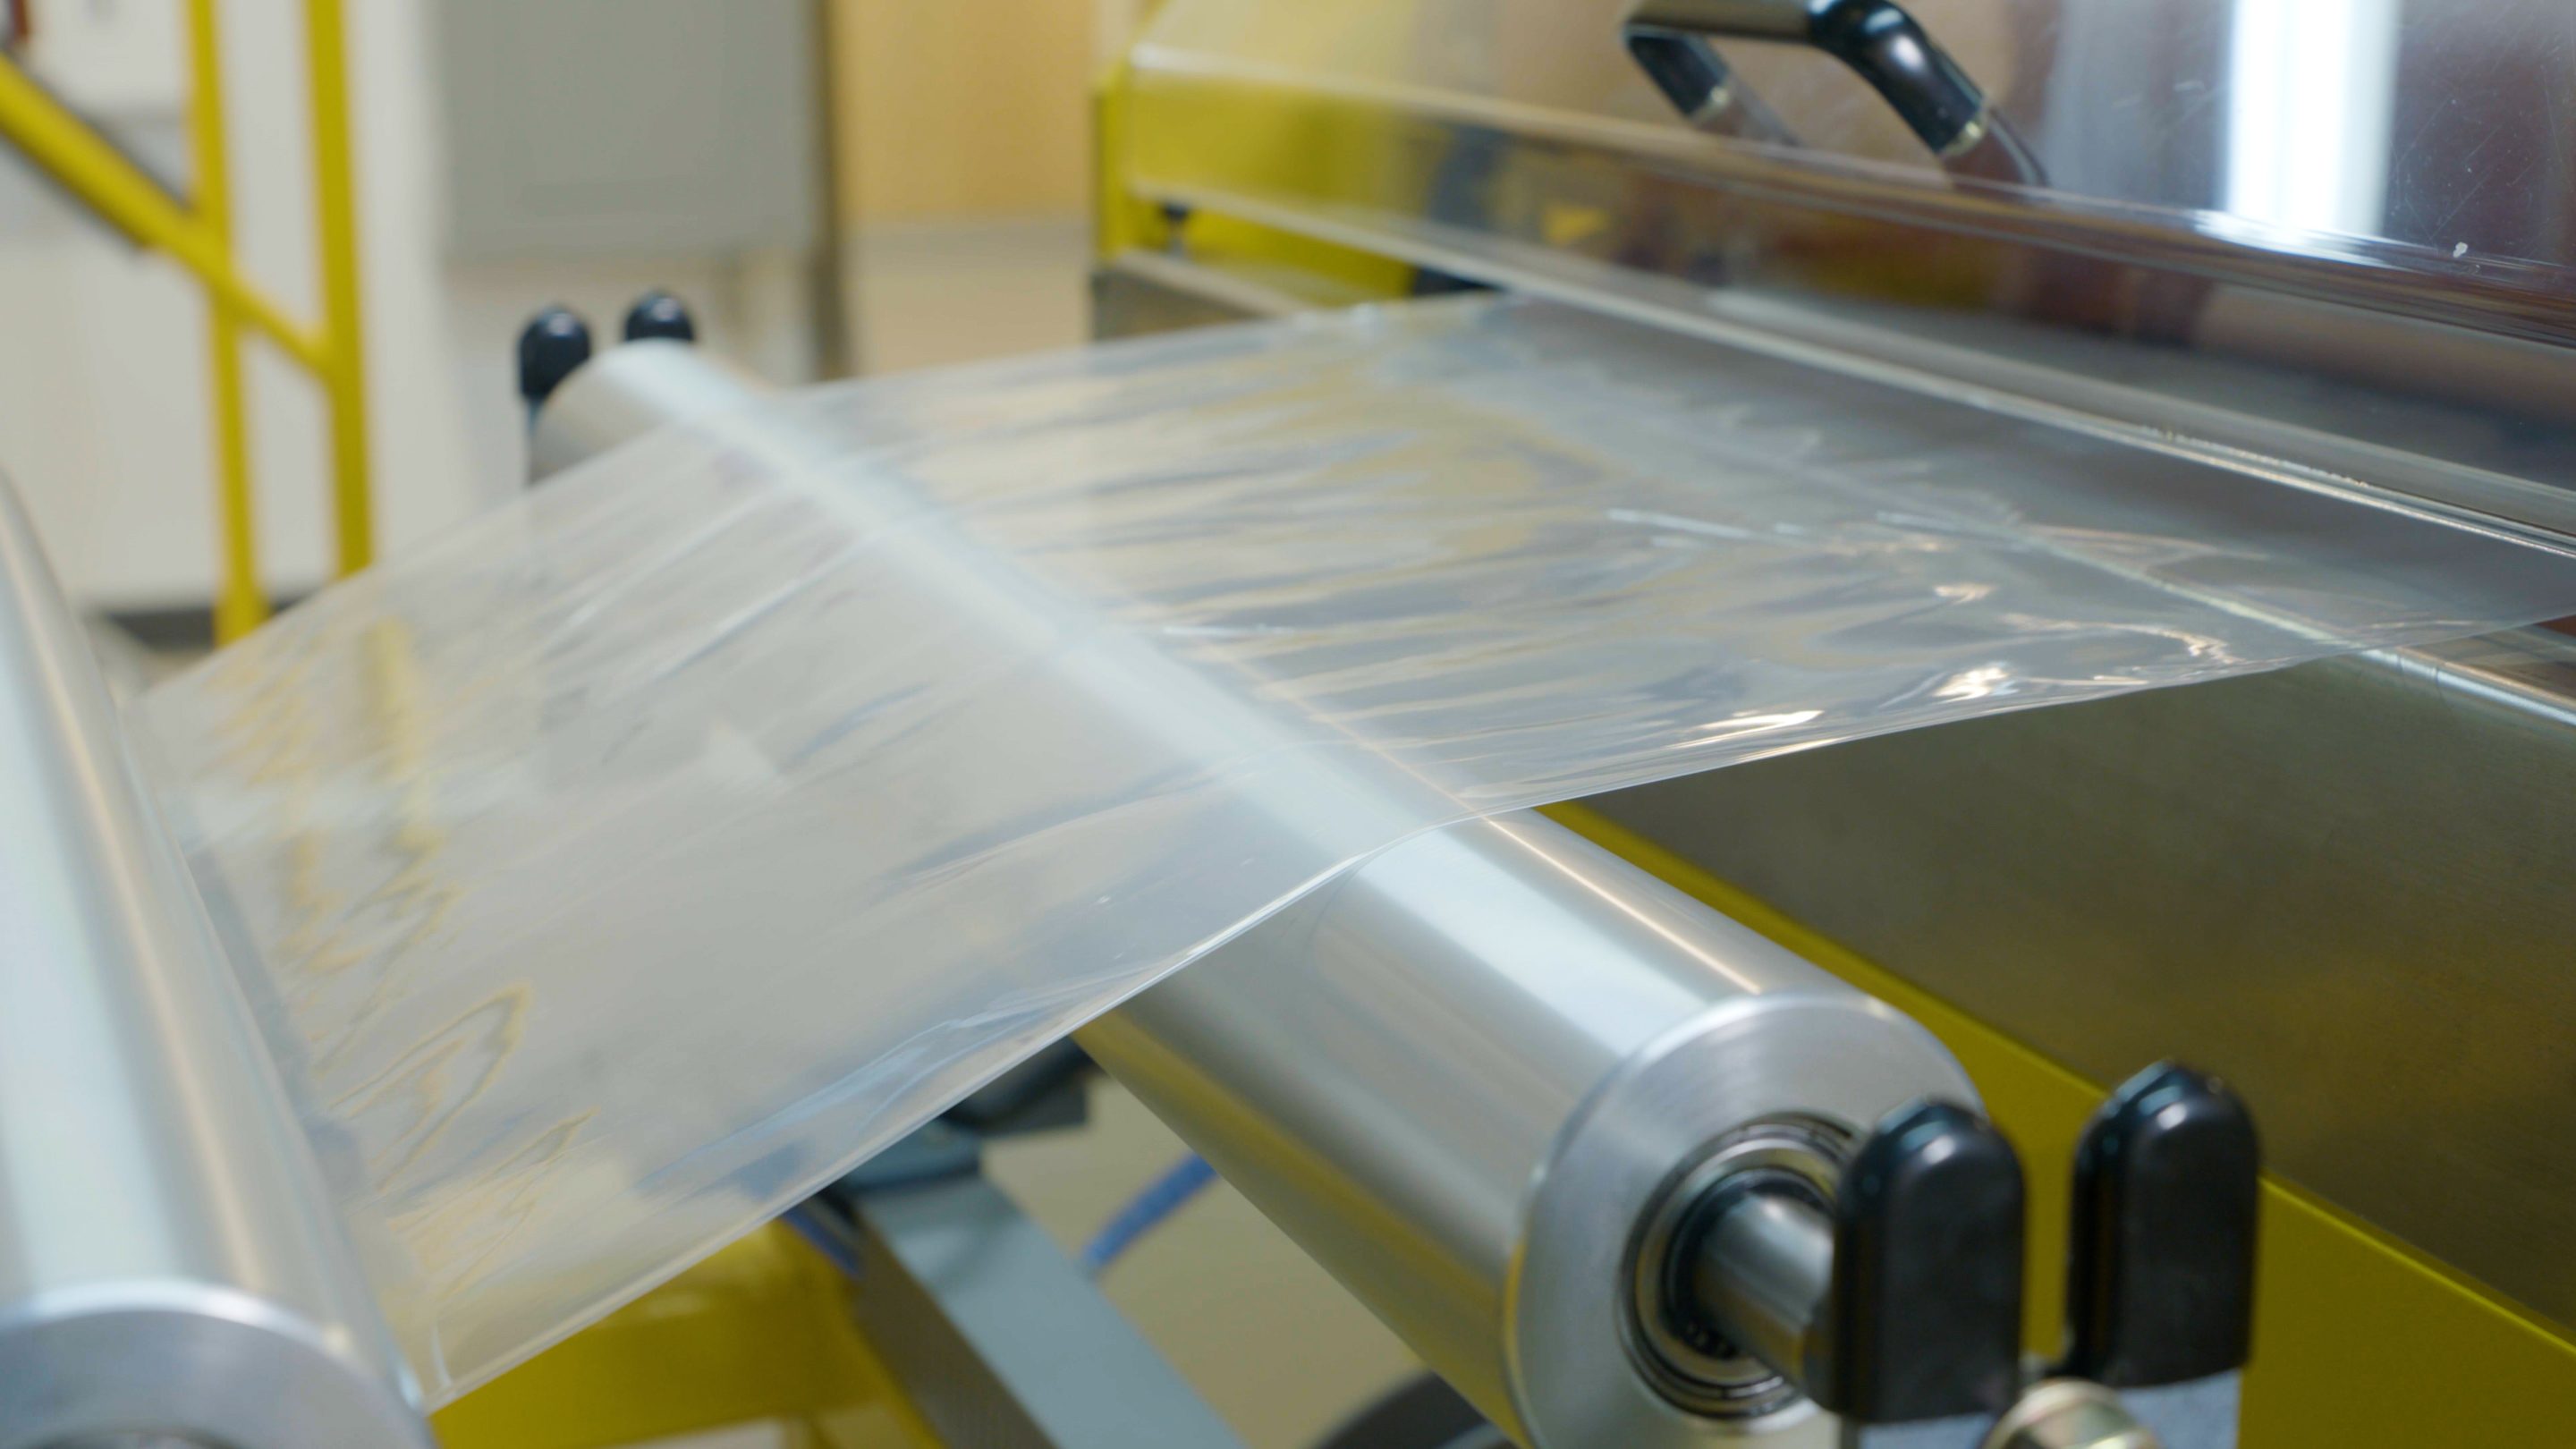 A film wrap roll being processed on a machine